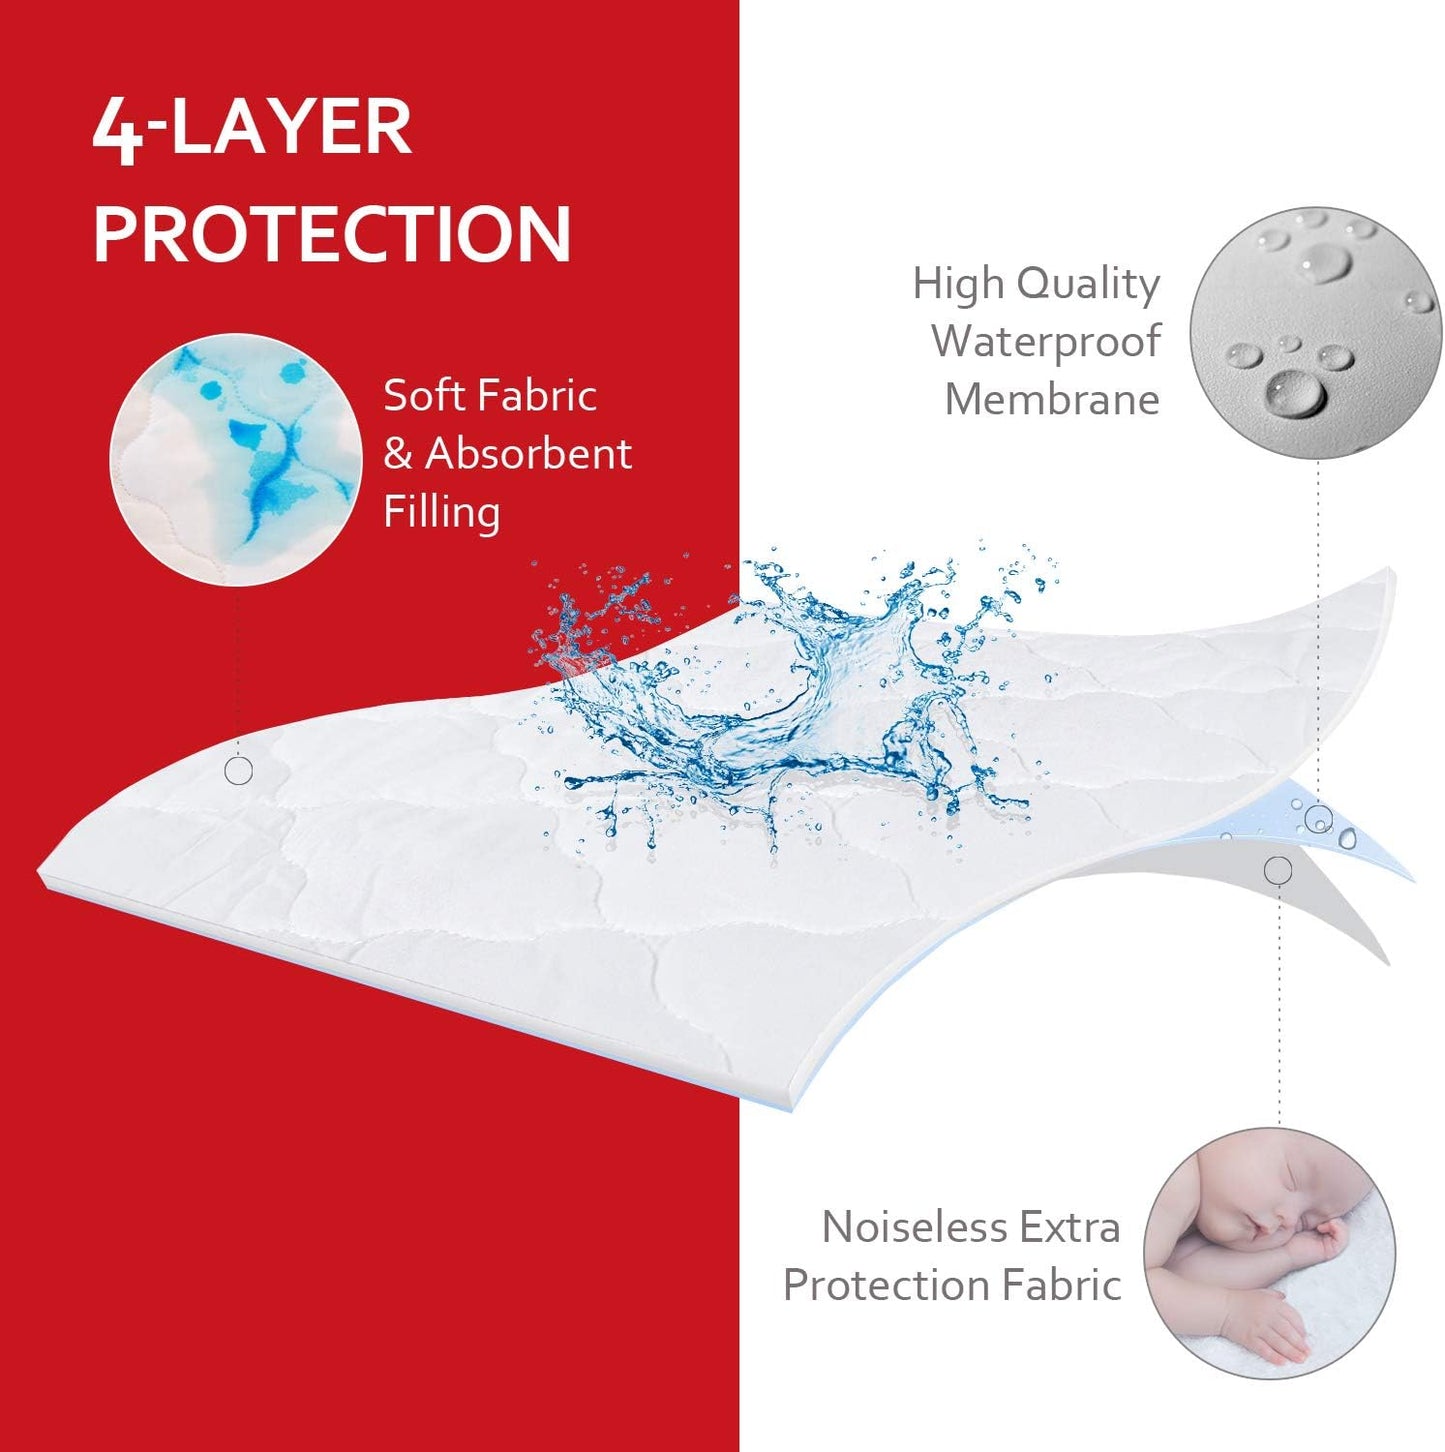 Pack N Play Mattress Pad Cover/ Protector - Ultra-Soft Microfiber, Waterproof, White (for Dream On Me Nest Portable Play Yard)